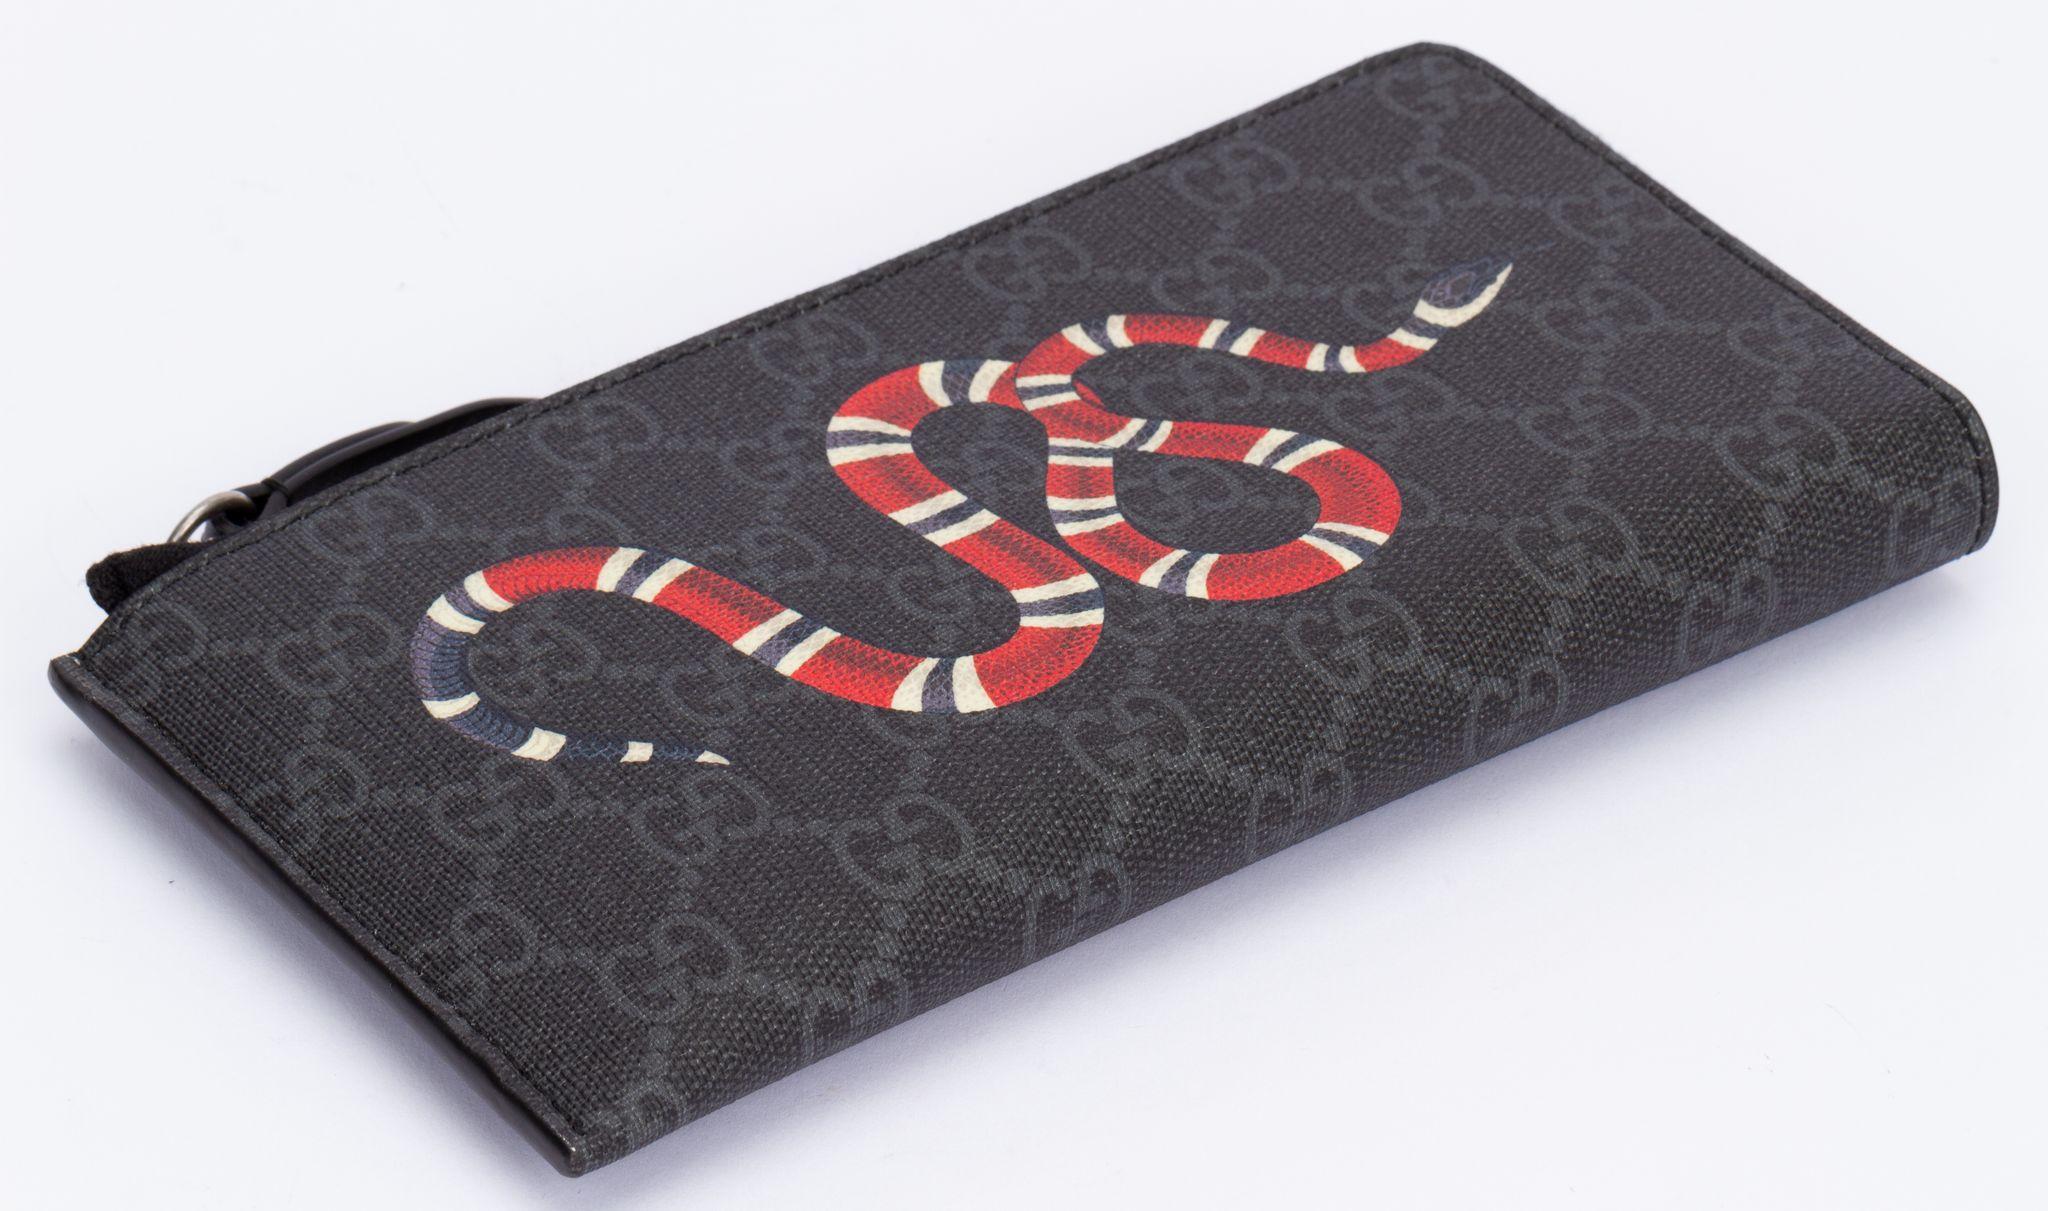 Long rectangular Gucci wallet with several card holders. The leather is imprinted with the traditional GG logos and on the front is a red snake. Limited edition collection. The piece is brand new and includes booklets, original box and dust cover.